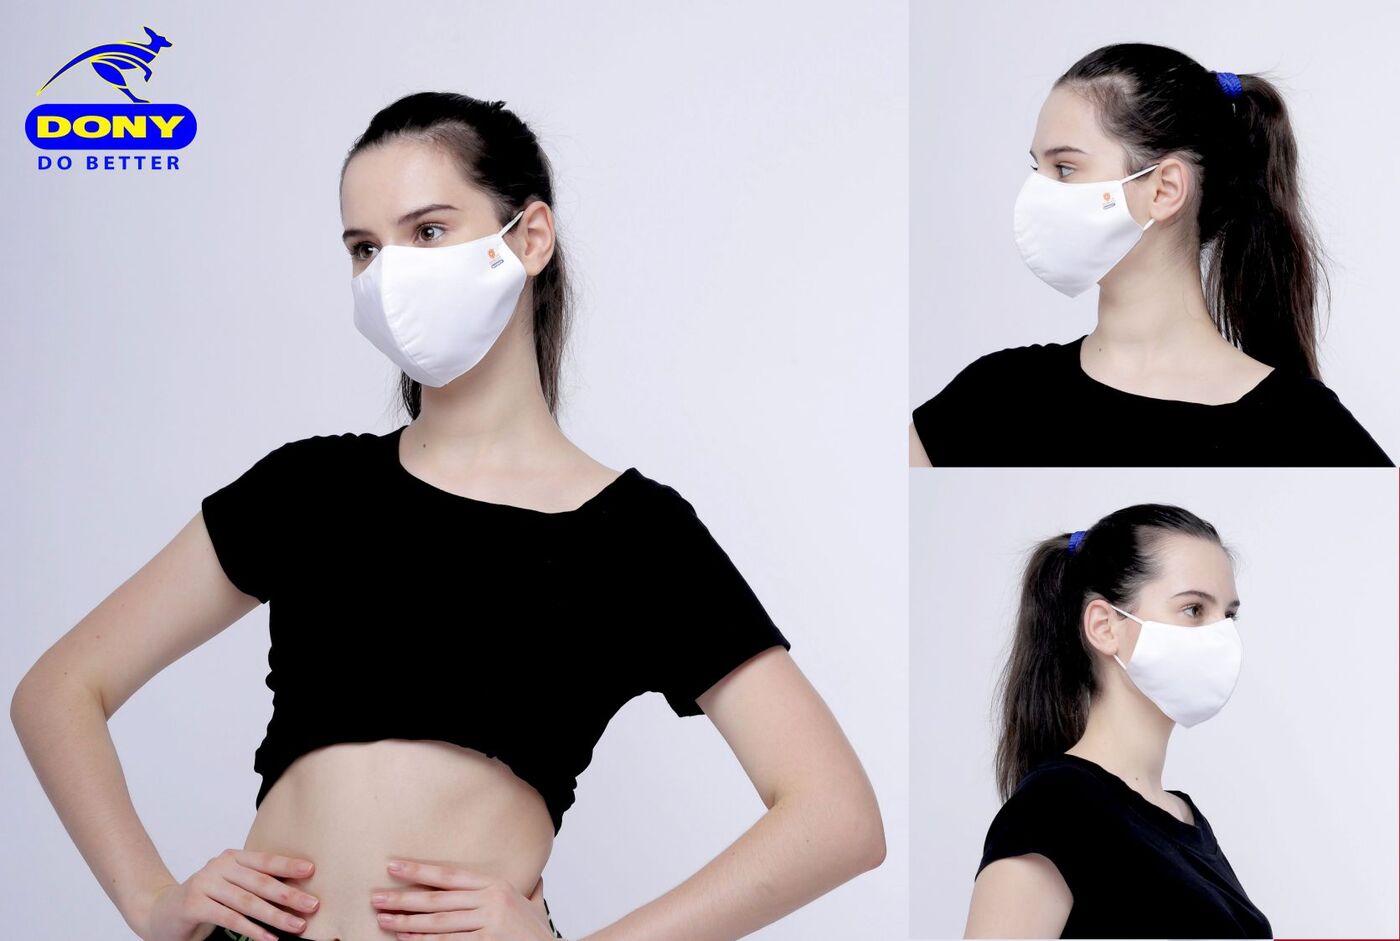 - Dony Offers The Best Cloth Face Mask For Canada via POD Retail Inc.: Reusable 60x, Breathable & Unisex Design